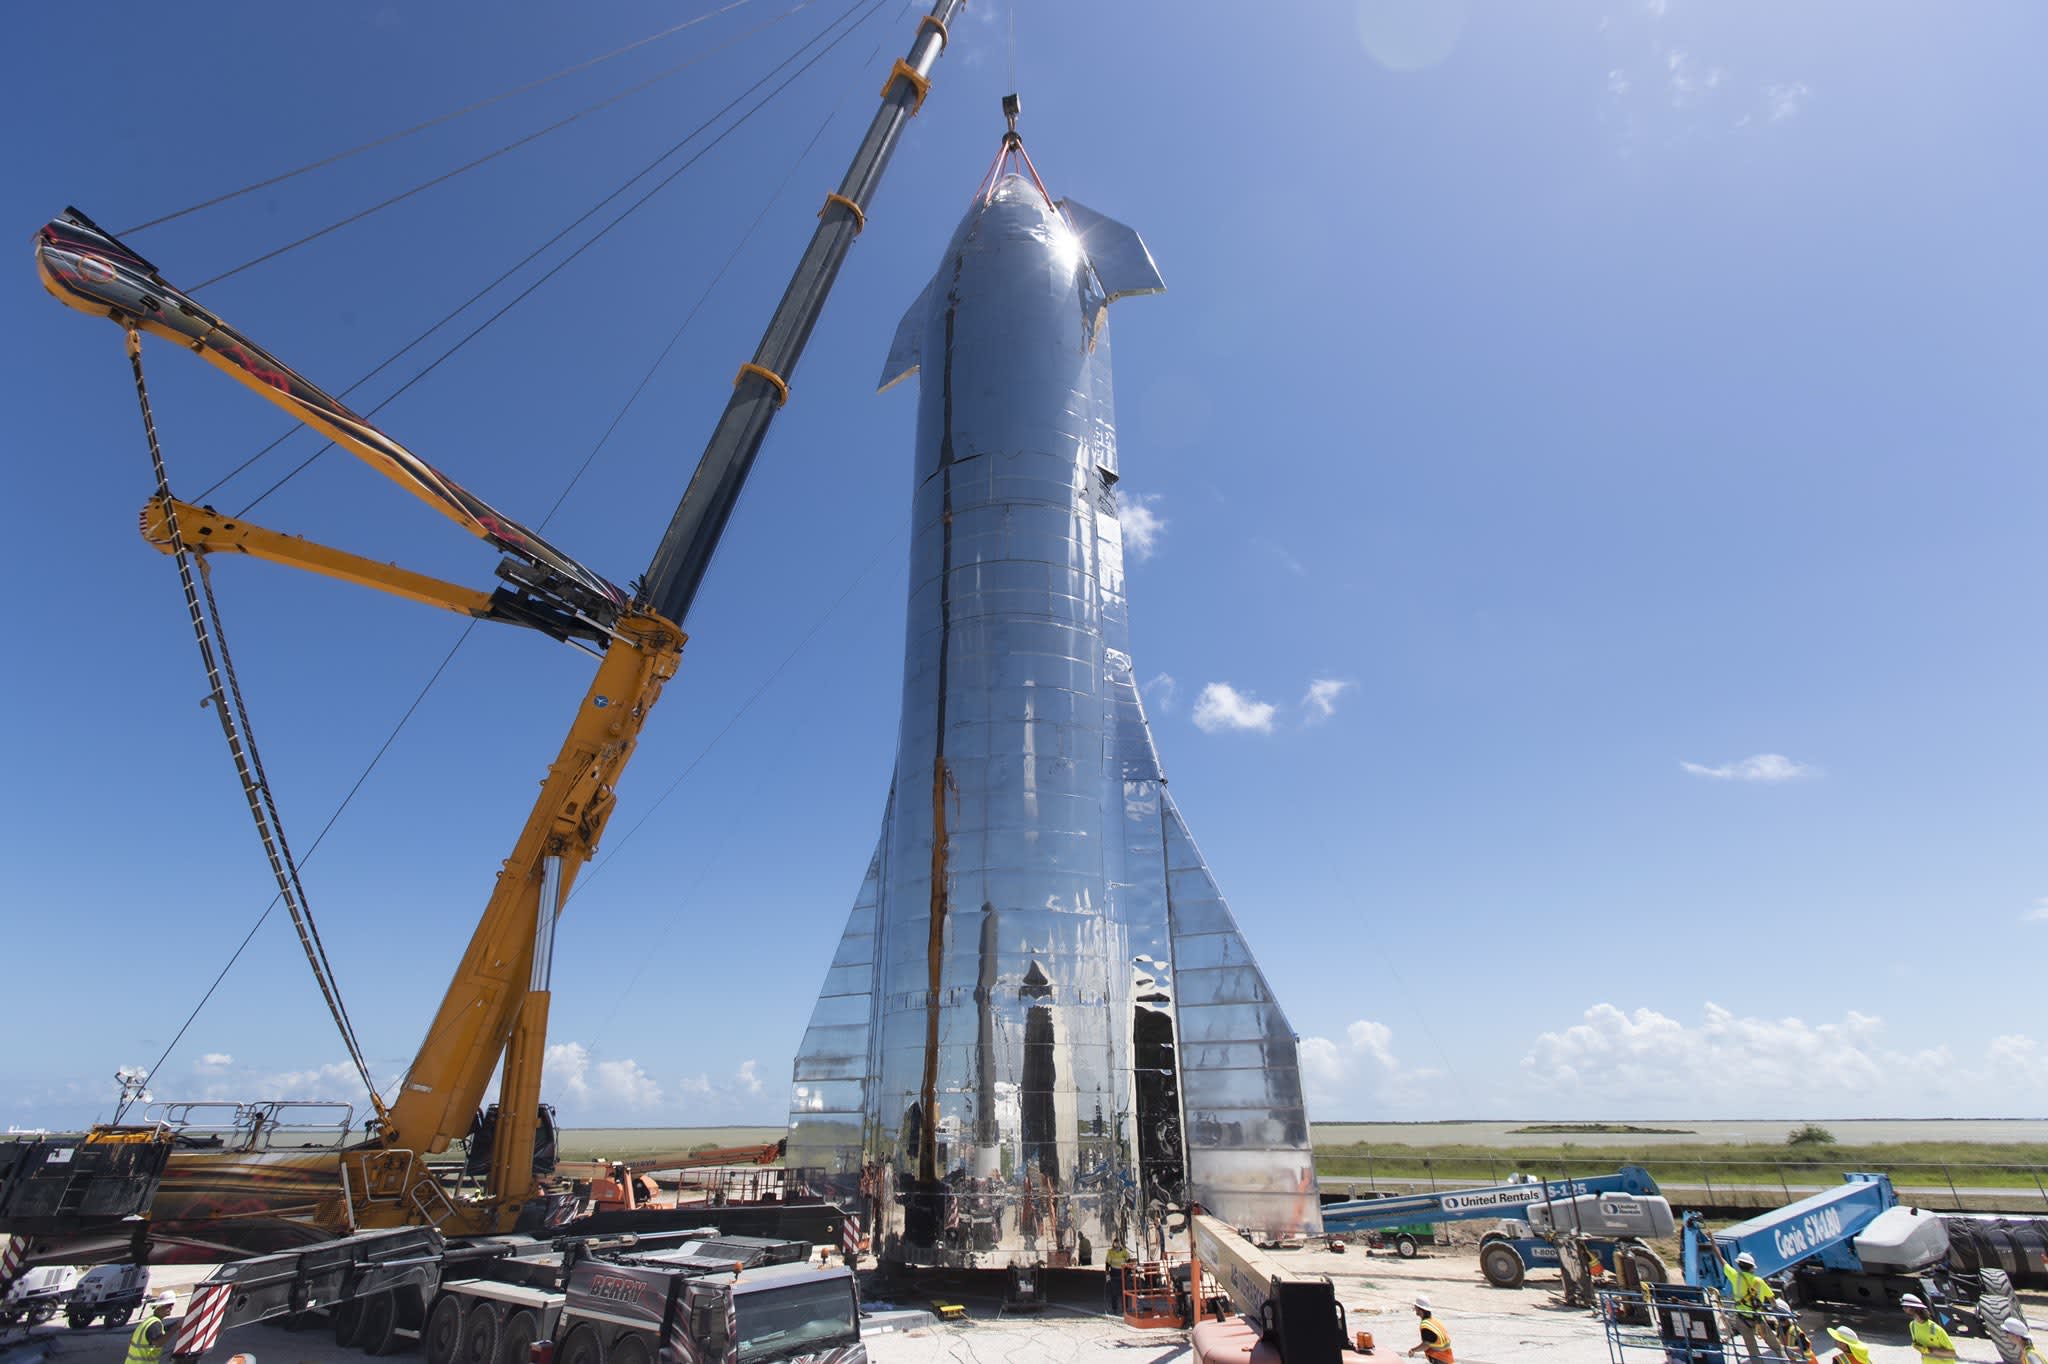 SpaceX Starship: Elon Musk to unveil company's first ...
